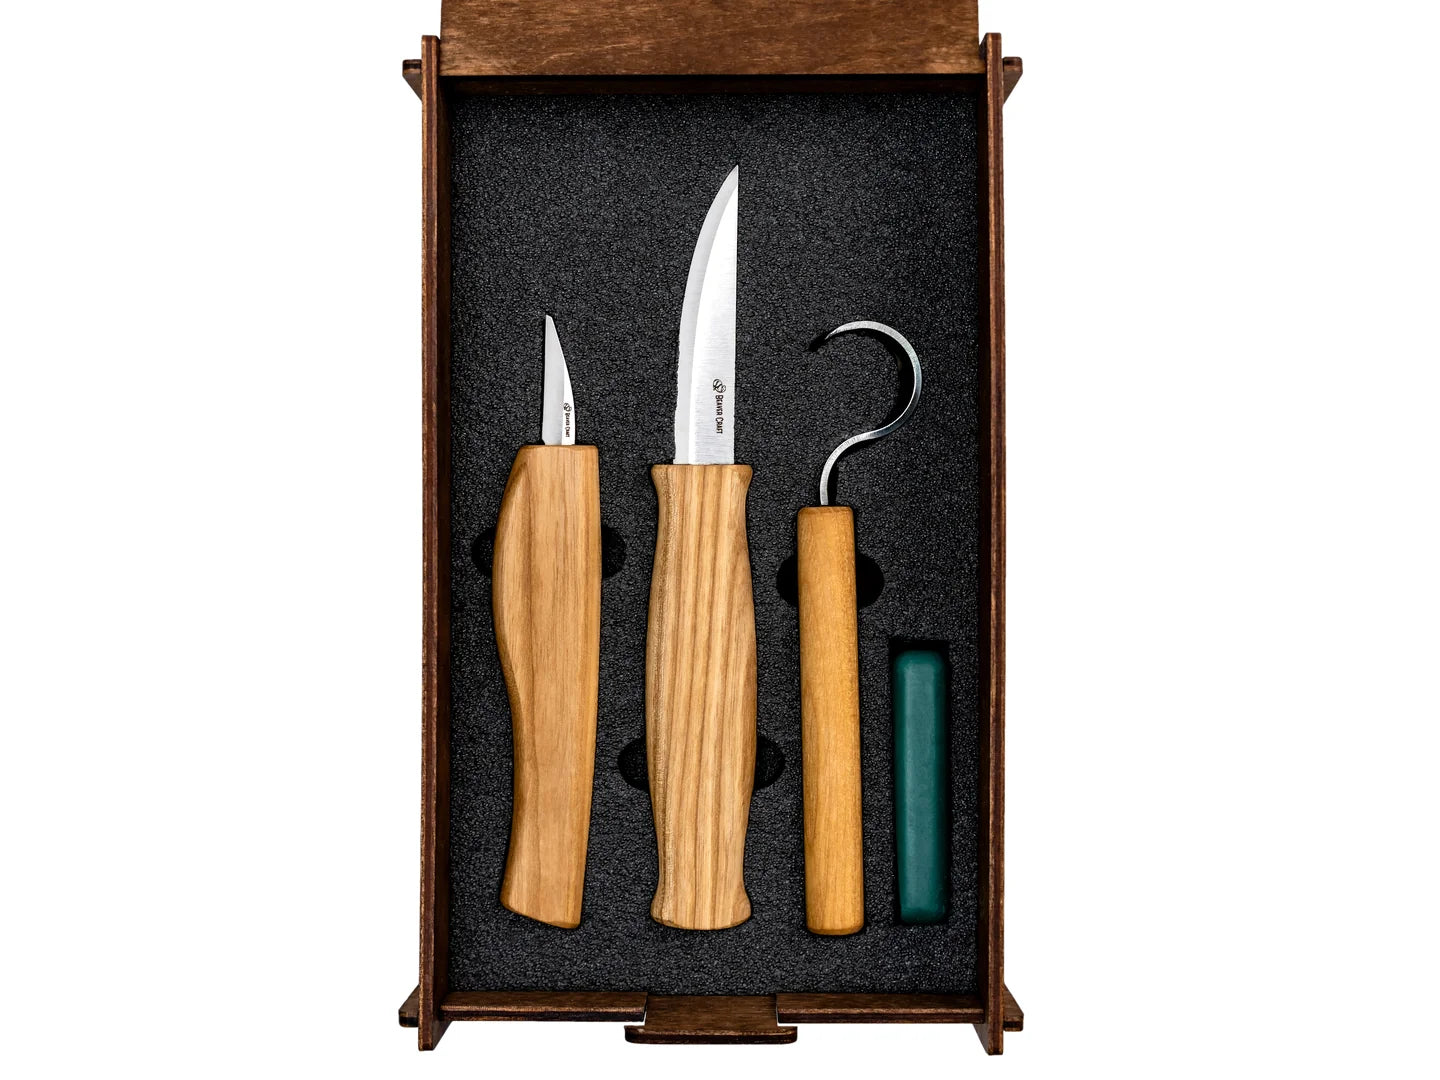 Masterpiece Knife Set in Gift Box - Cool gifts for Art Lovers - 6